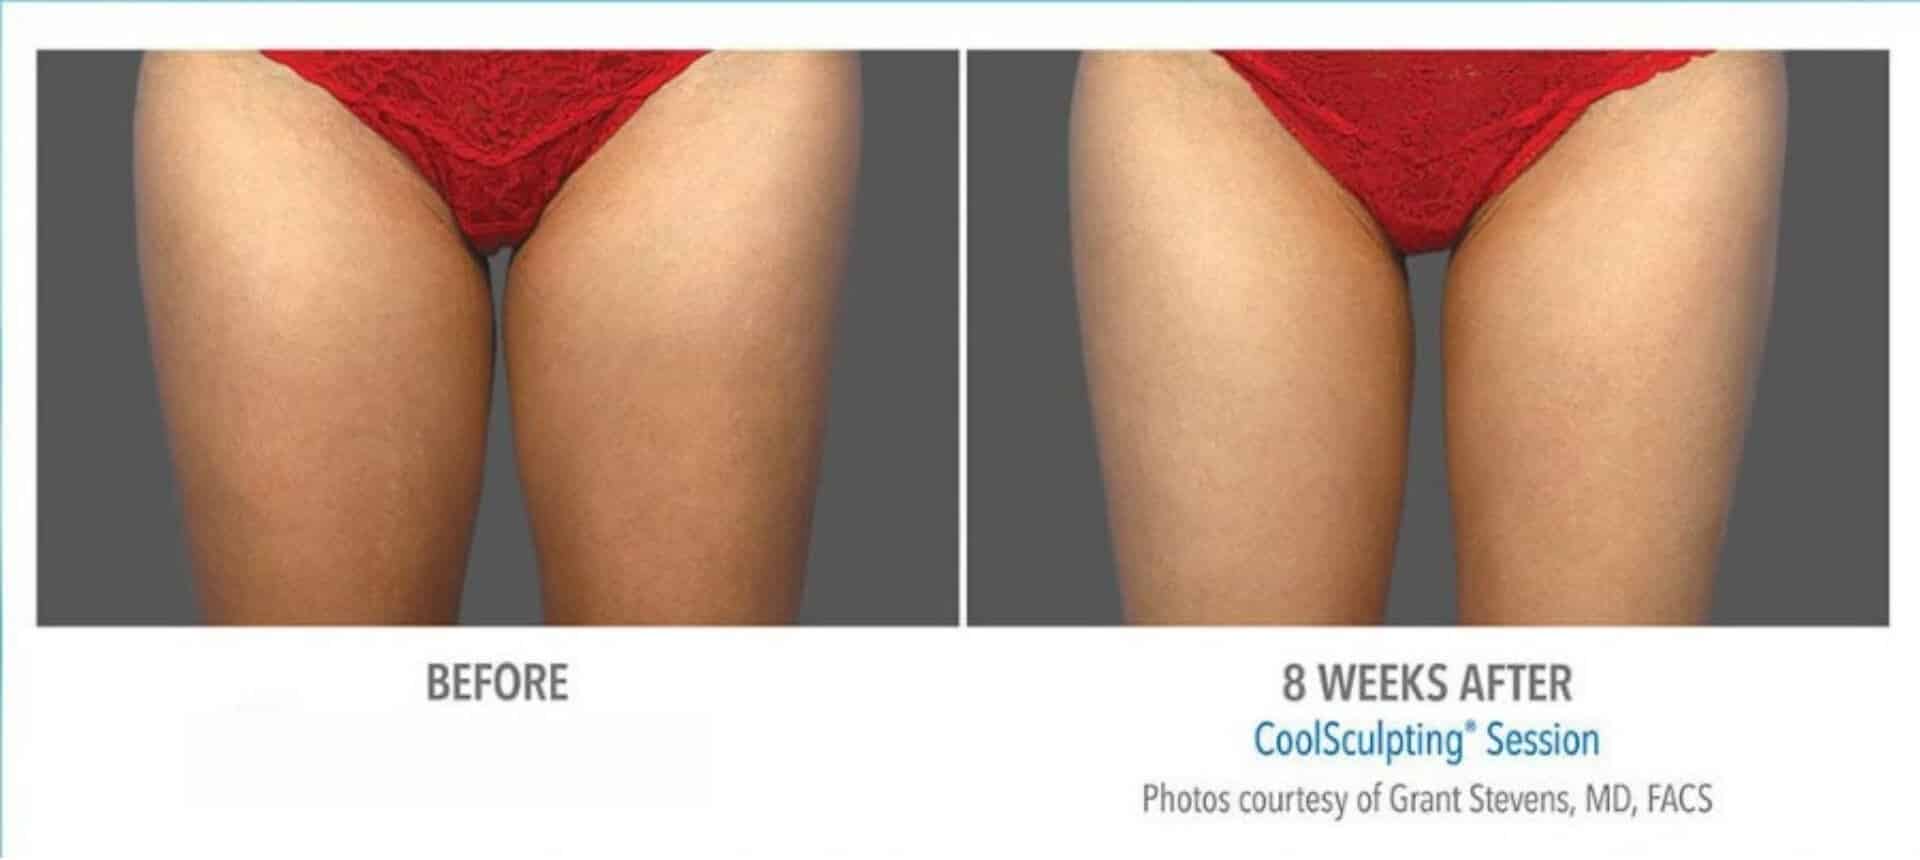 coolsculpting before after